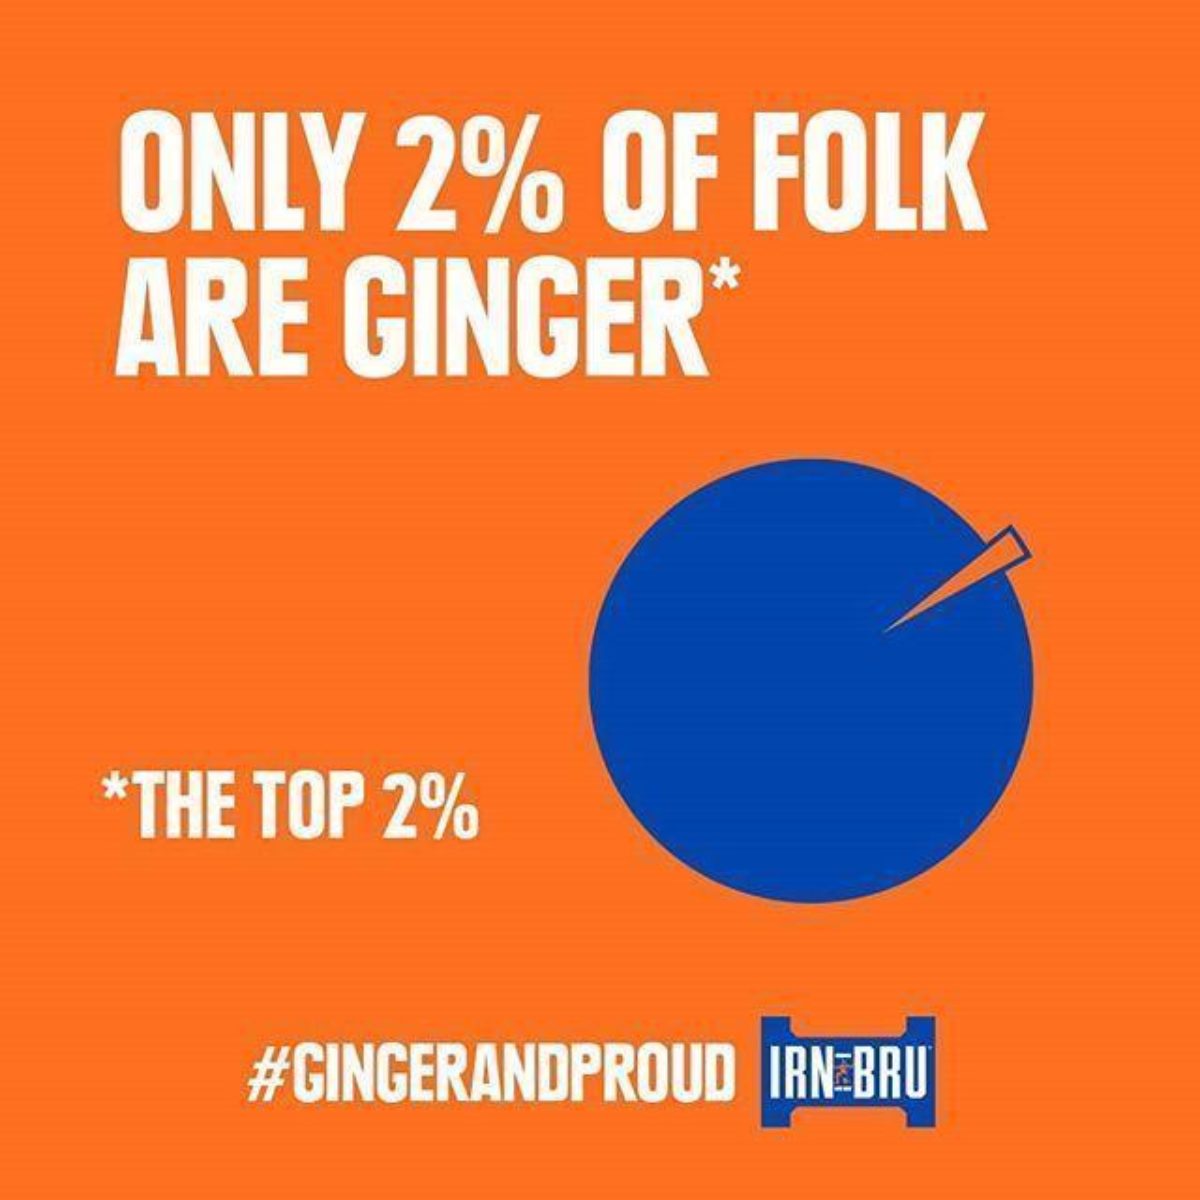 Only 2% of folk are ginger, the top 2%